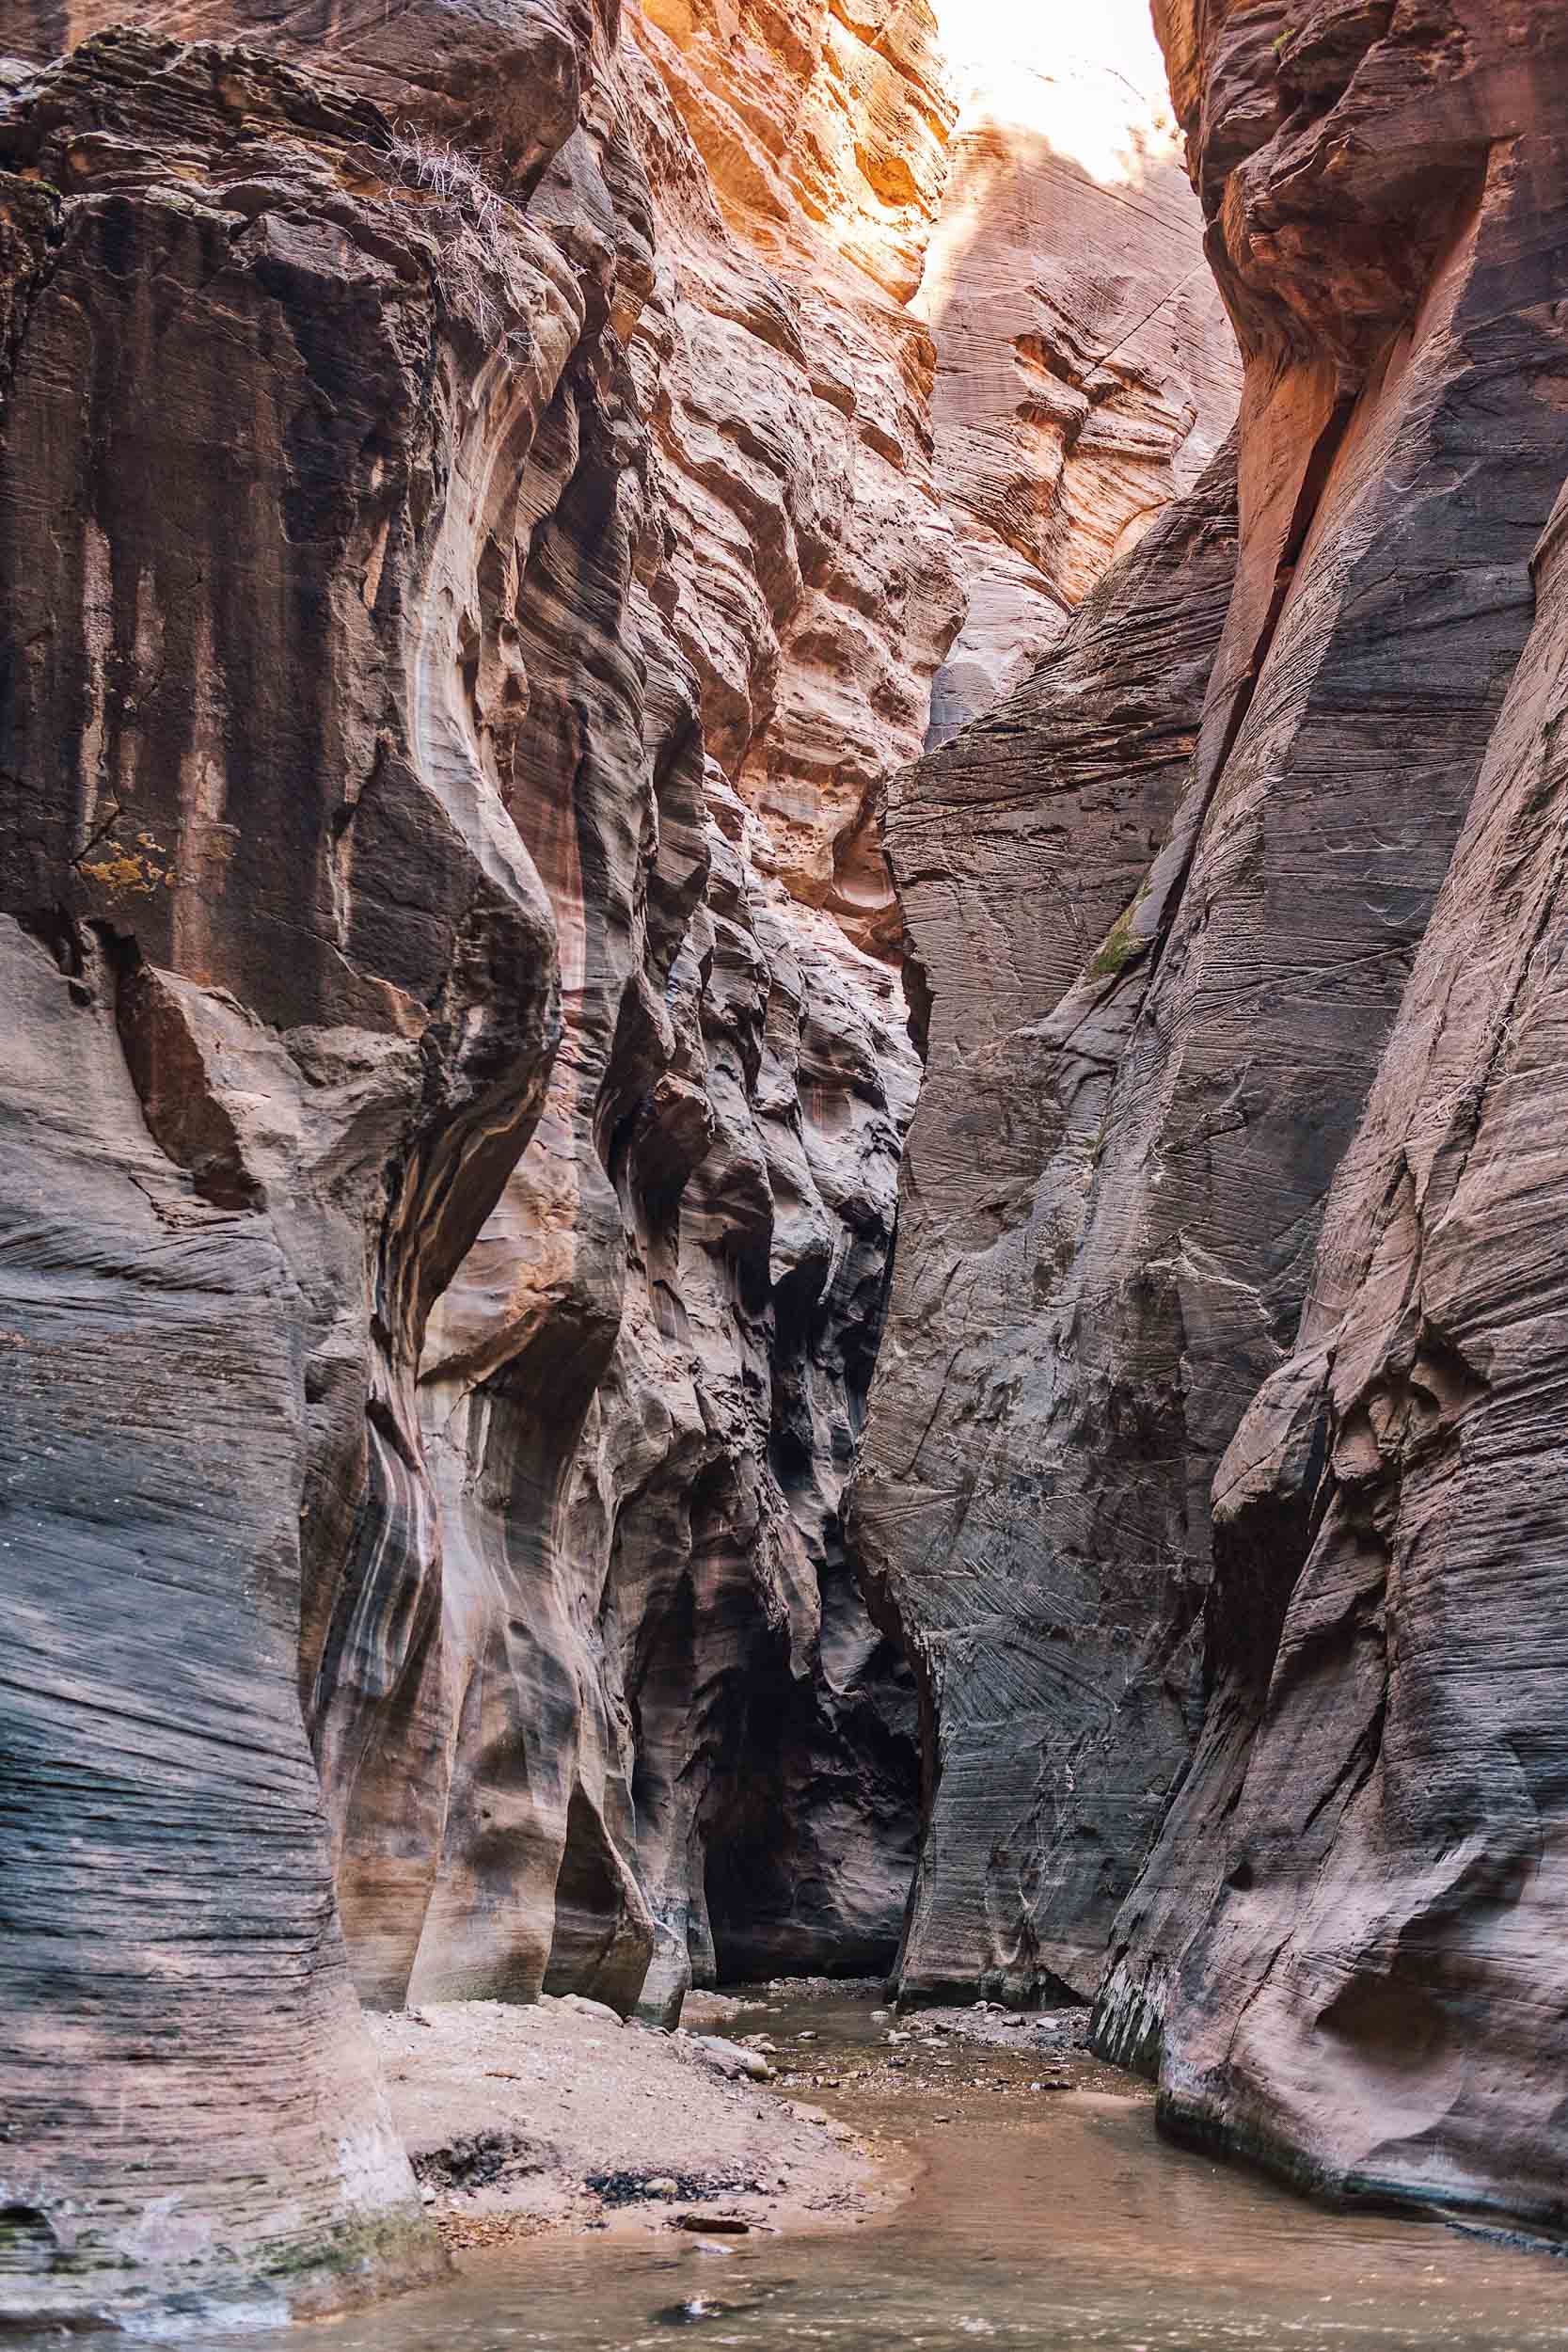 The Narrows at Zion National Park completely crowd-free during winter